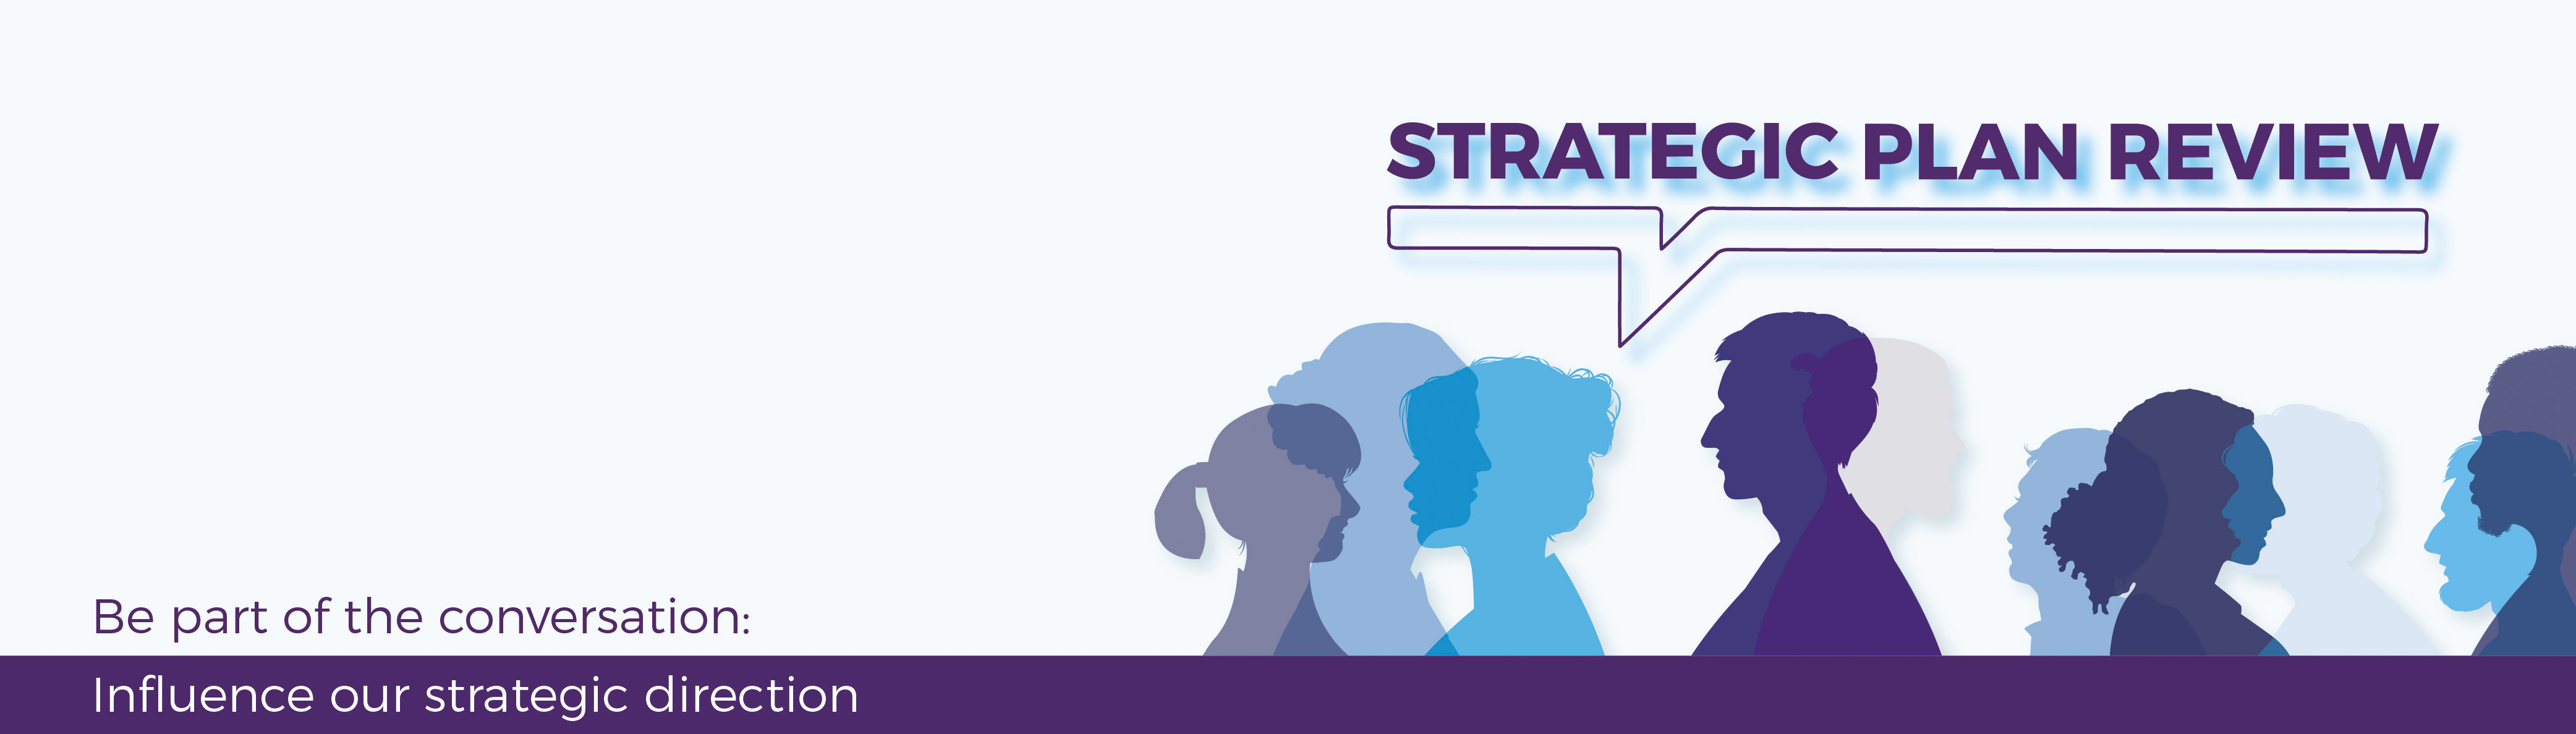 Strategic Plan review graphic